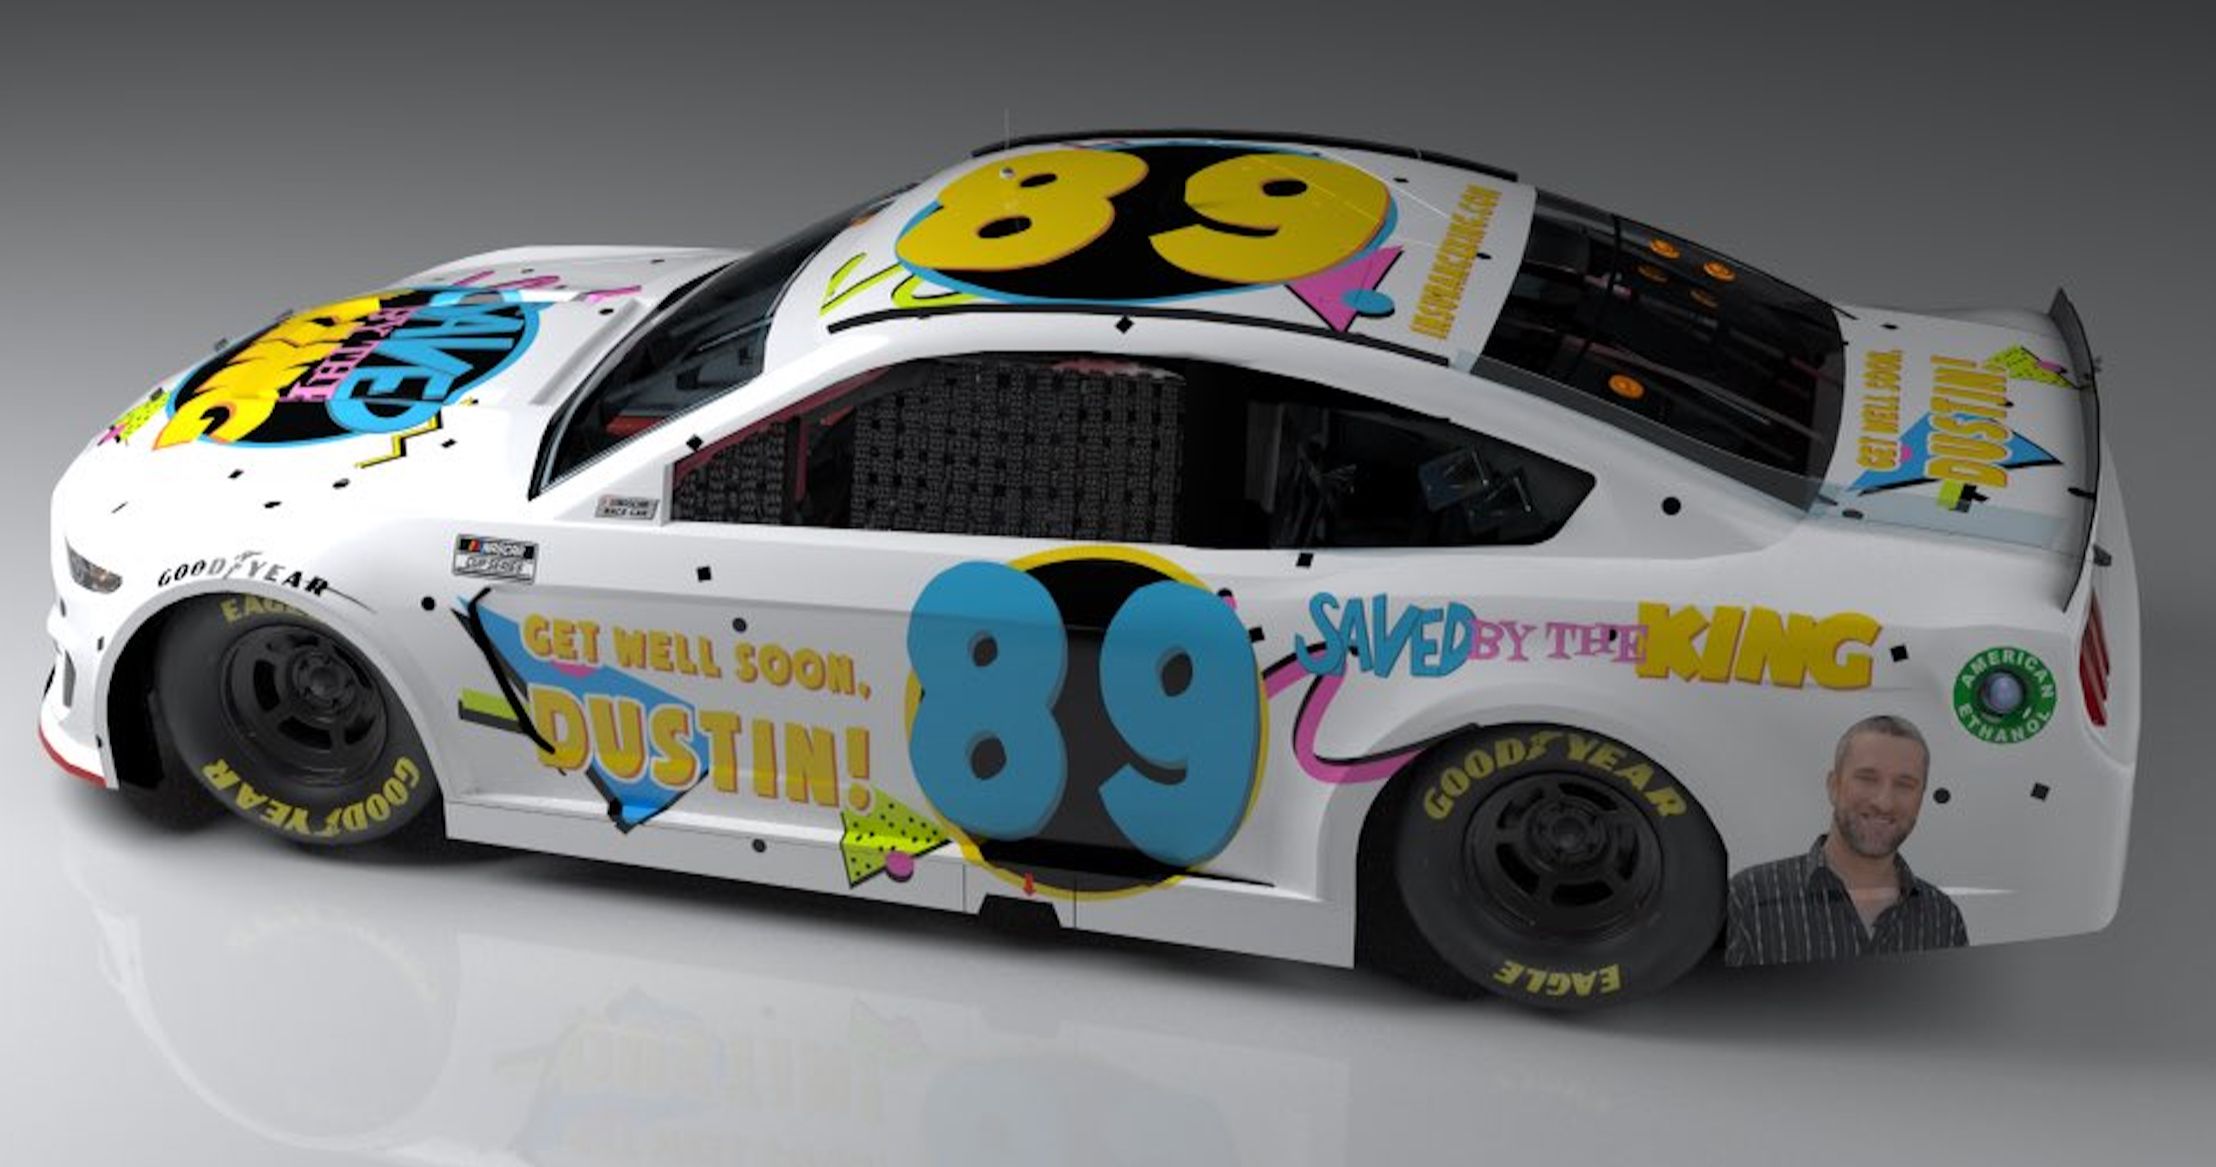 NASCAR Sponsor Honors Dustin Diamond with Saved by the Bell Car